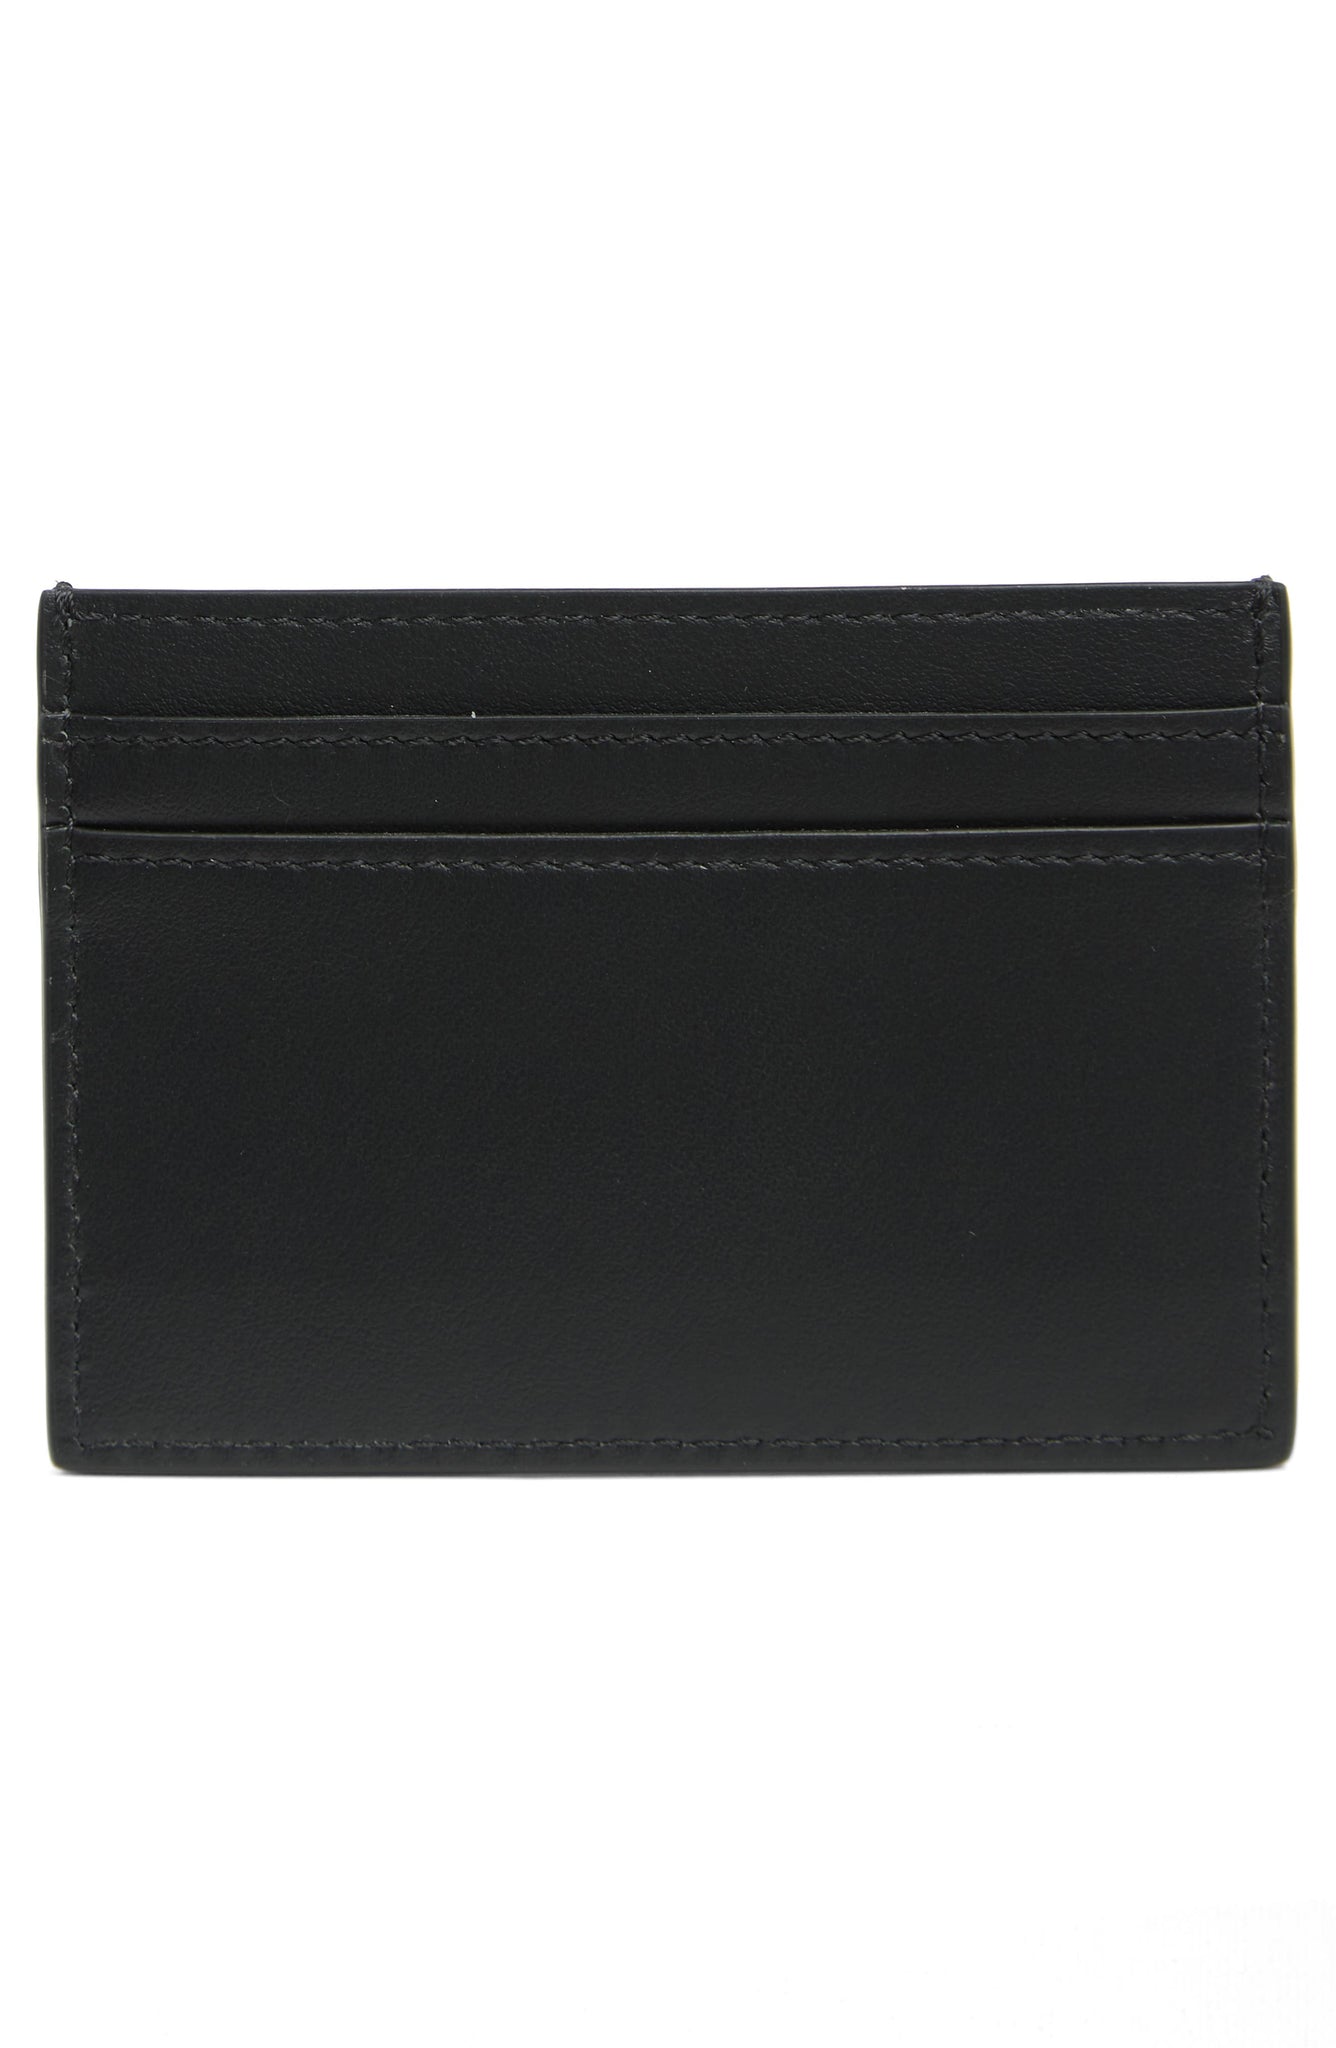 MOSCHINO Leather Card Case, Alternate, color, BLACK